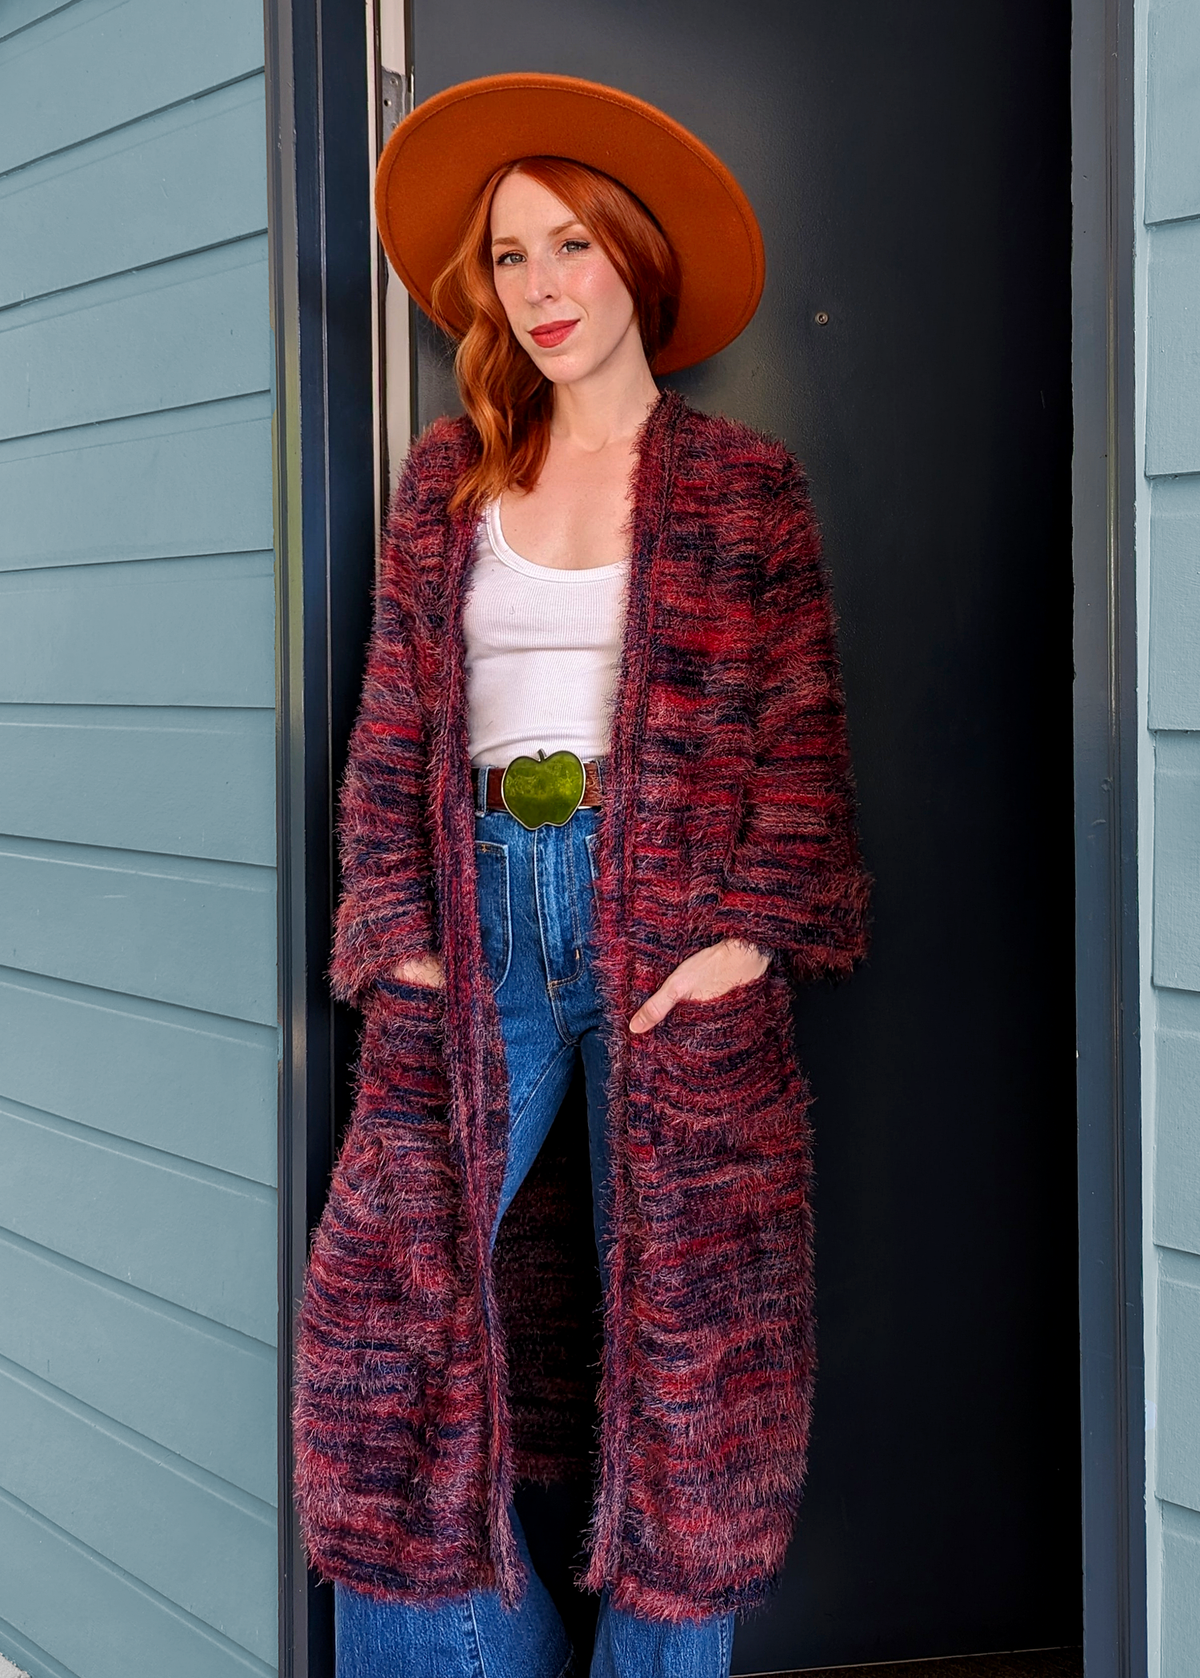 70s inspired fuzzy eyelash knit cardigan duster with a midi-maxi length. Features an open front, wide bell cuffed sleeves, and a pink, red, and purple spacedye design